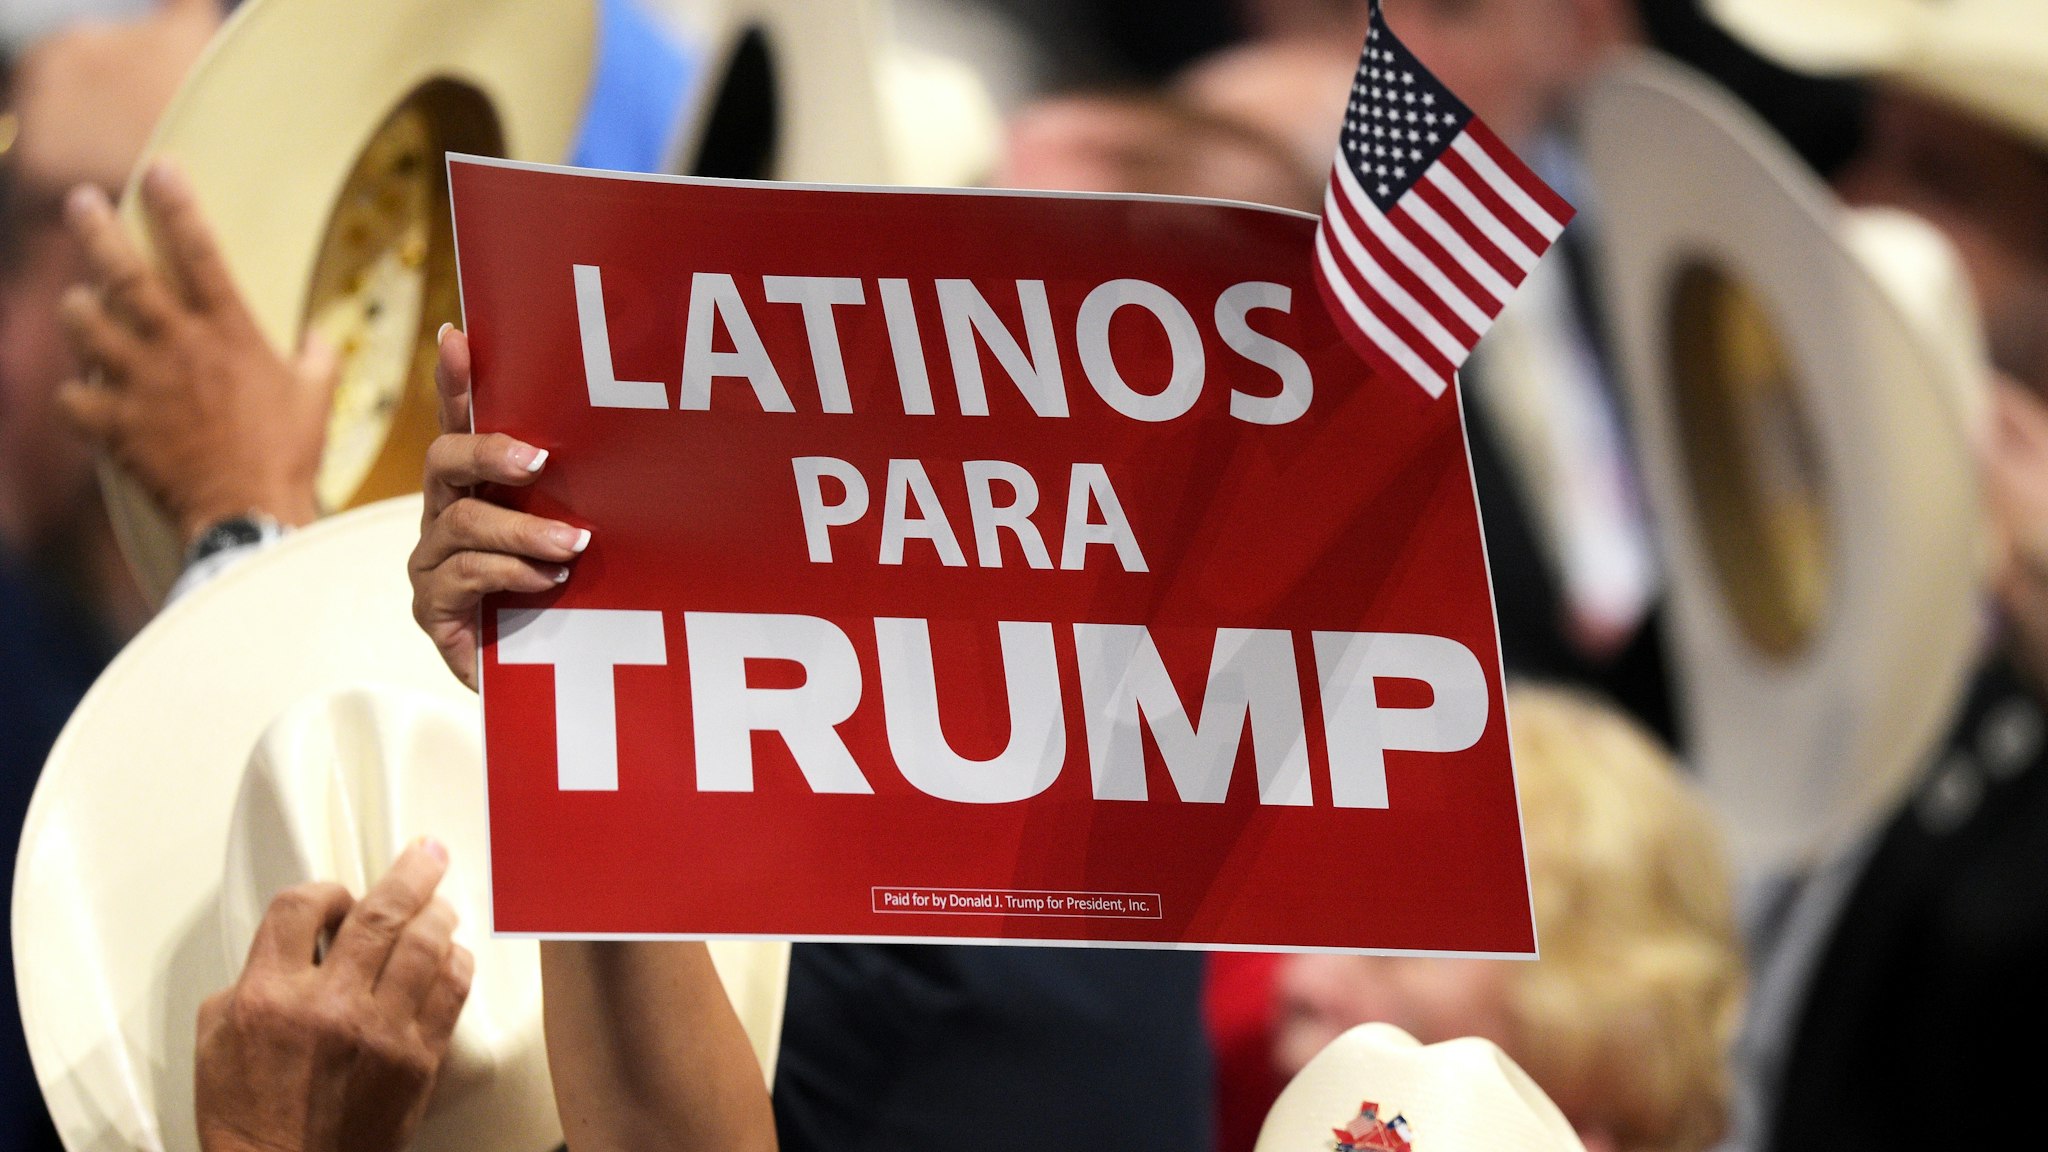 CLEVELAND, OH - JULY 21: A delegate holds up sign that reads "Latinos Para Trump" during the evening session on the fourth day of the Republican National Convention on July 21, 2016 at the Quicken Loans Arena in Cleveland, Ohio. Republican presidential candidate Donald Trump received the number of votes needed to secure the party's nomination. An estimated 50,000 people are expected in Cleveland, including hundreds of protesters and members of the media. The four-day Republican National Convention kicked off on July 18.